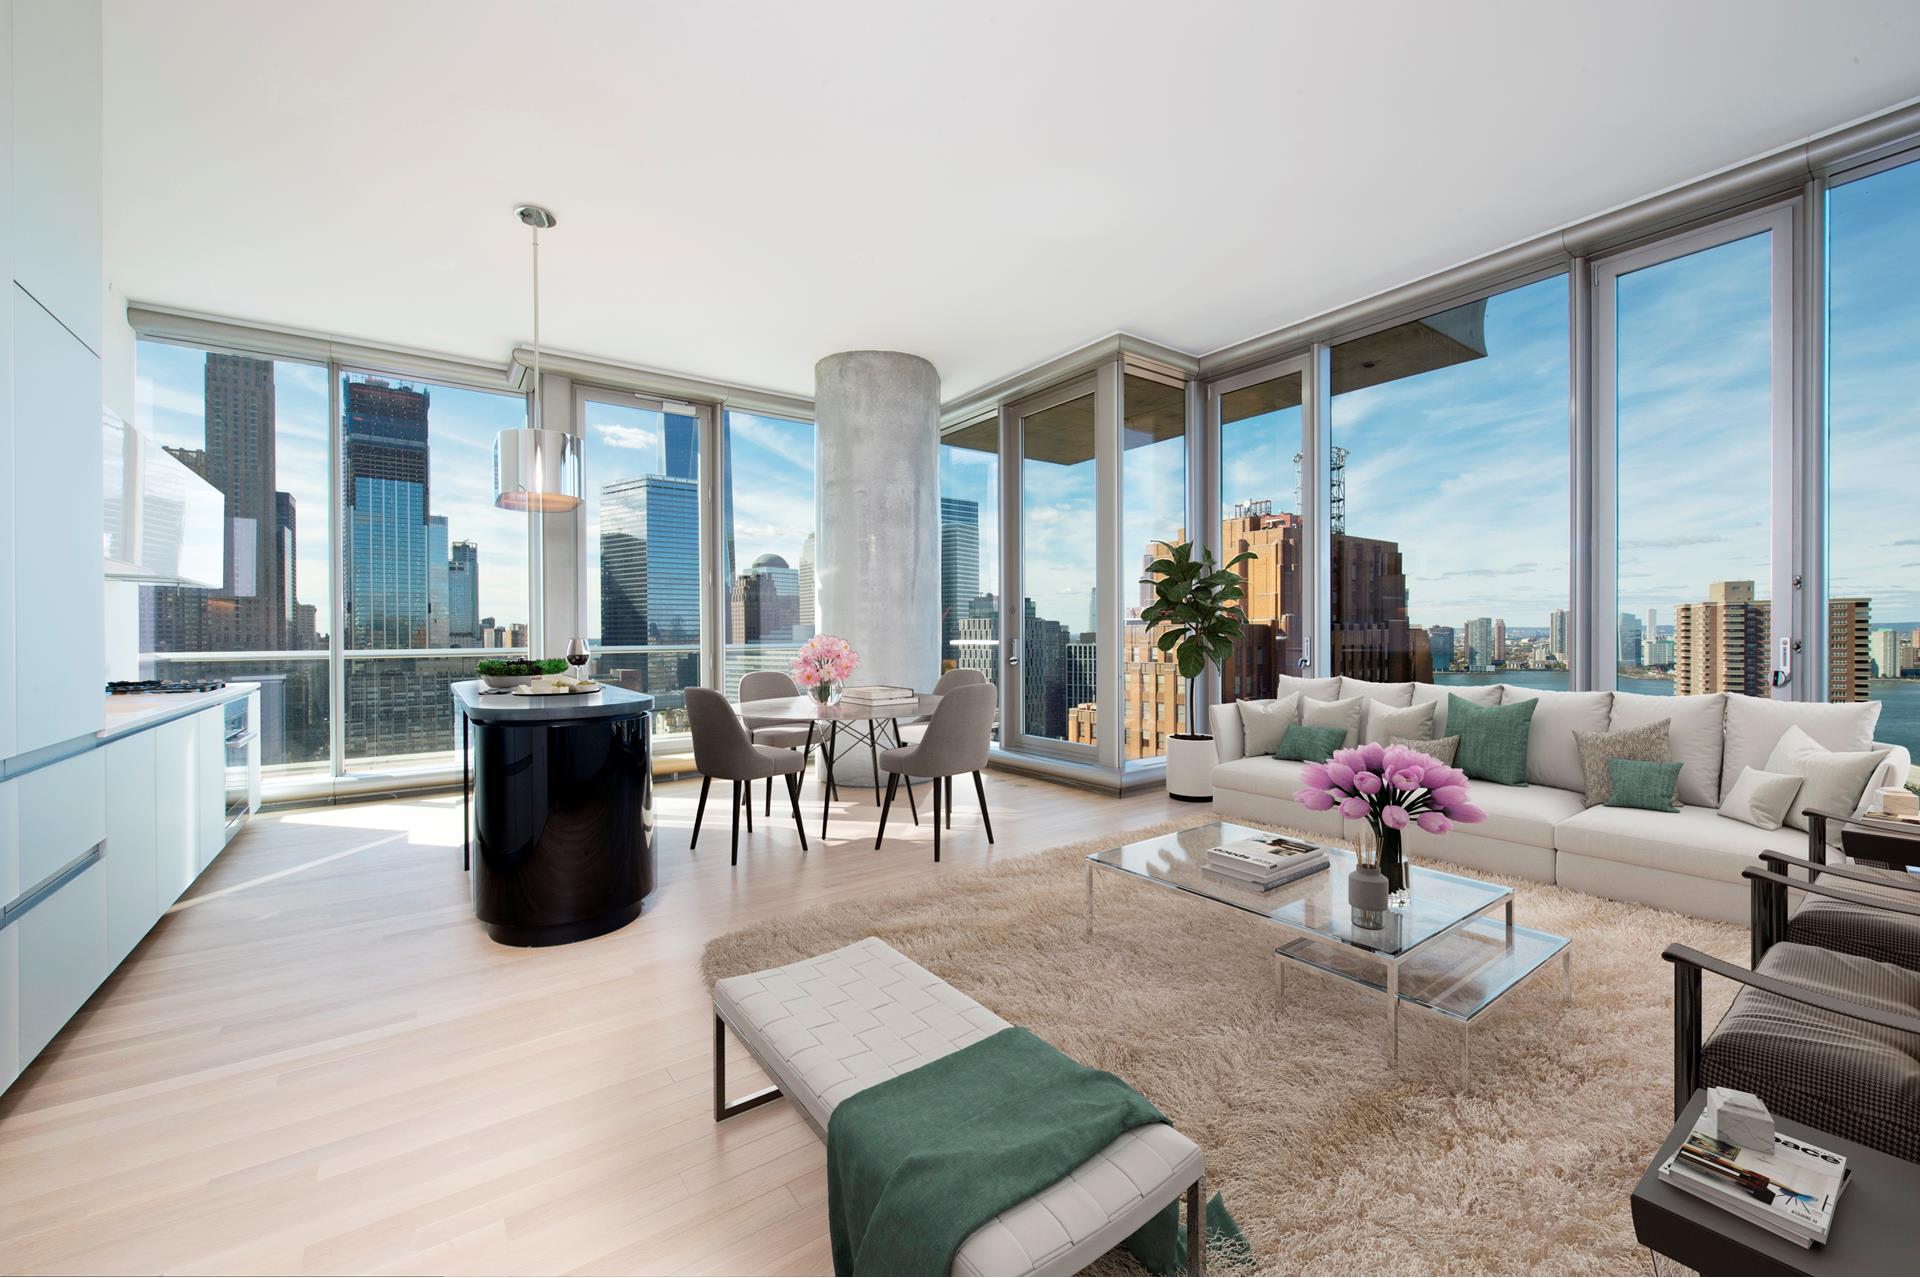 56 Leonard Street 29Aw, Tribeca, Downtown, NYC - 2 Bedrooms  
2.5 Bathrooms  
4 Rooms - 